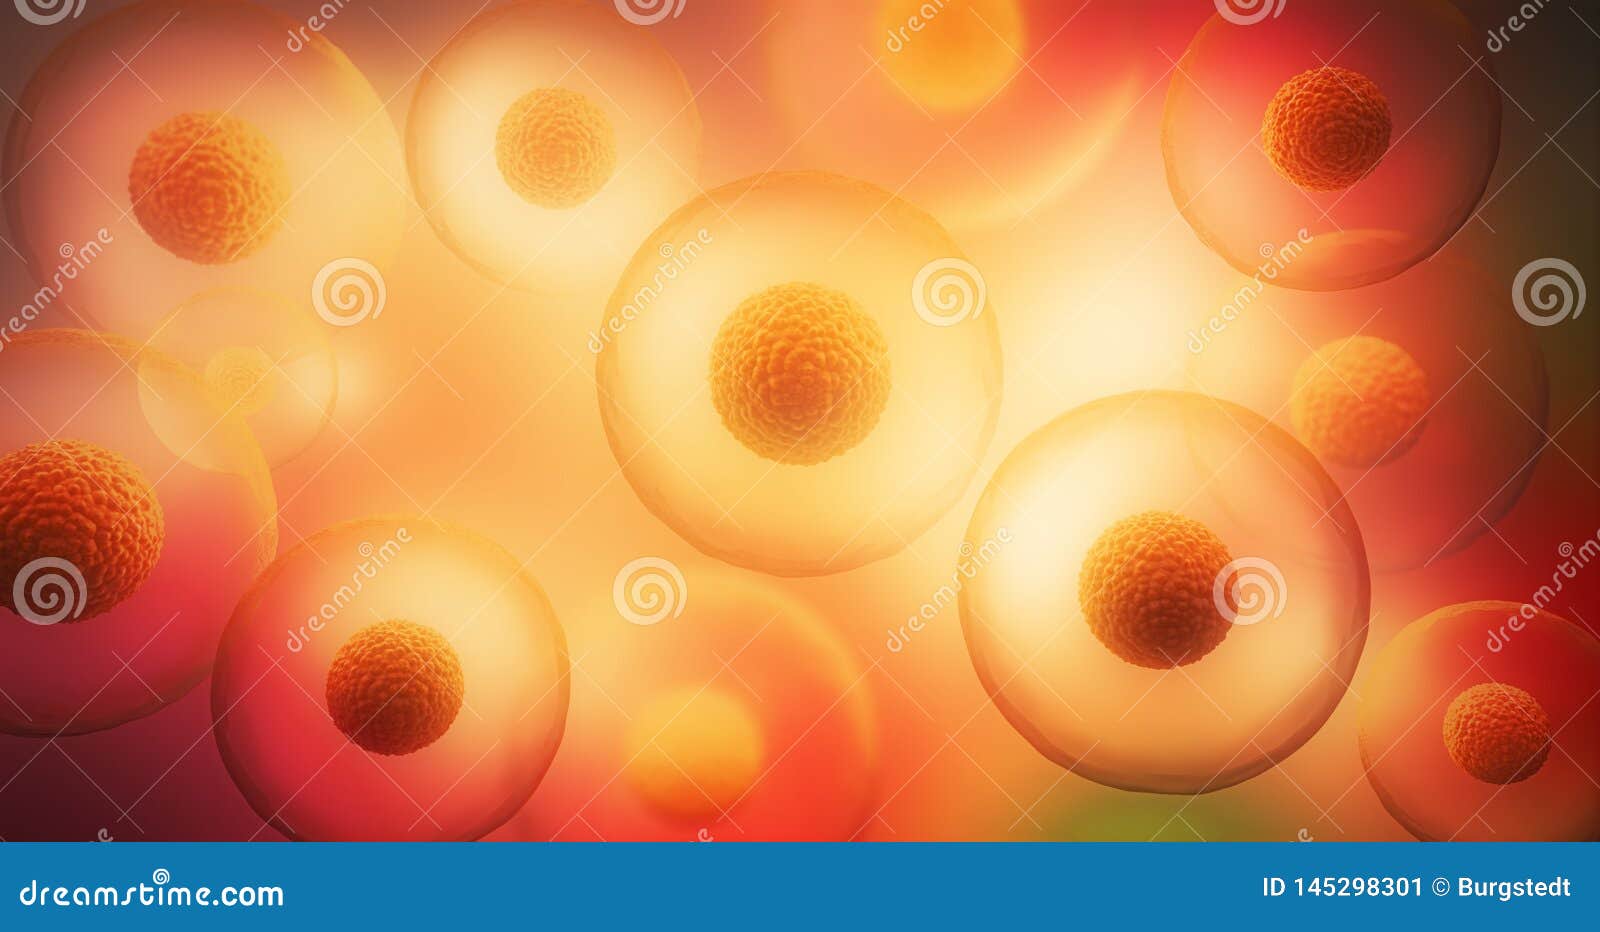 Transparent Cells with Nucleus on Yellow Background Stock Illustration -  Illustration of growth, cloning: 145298301